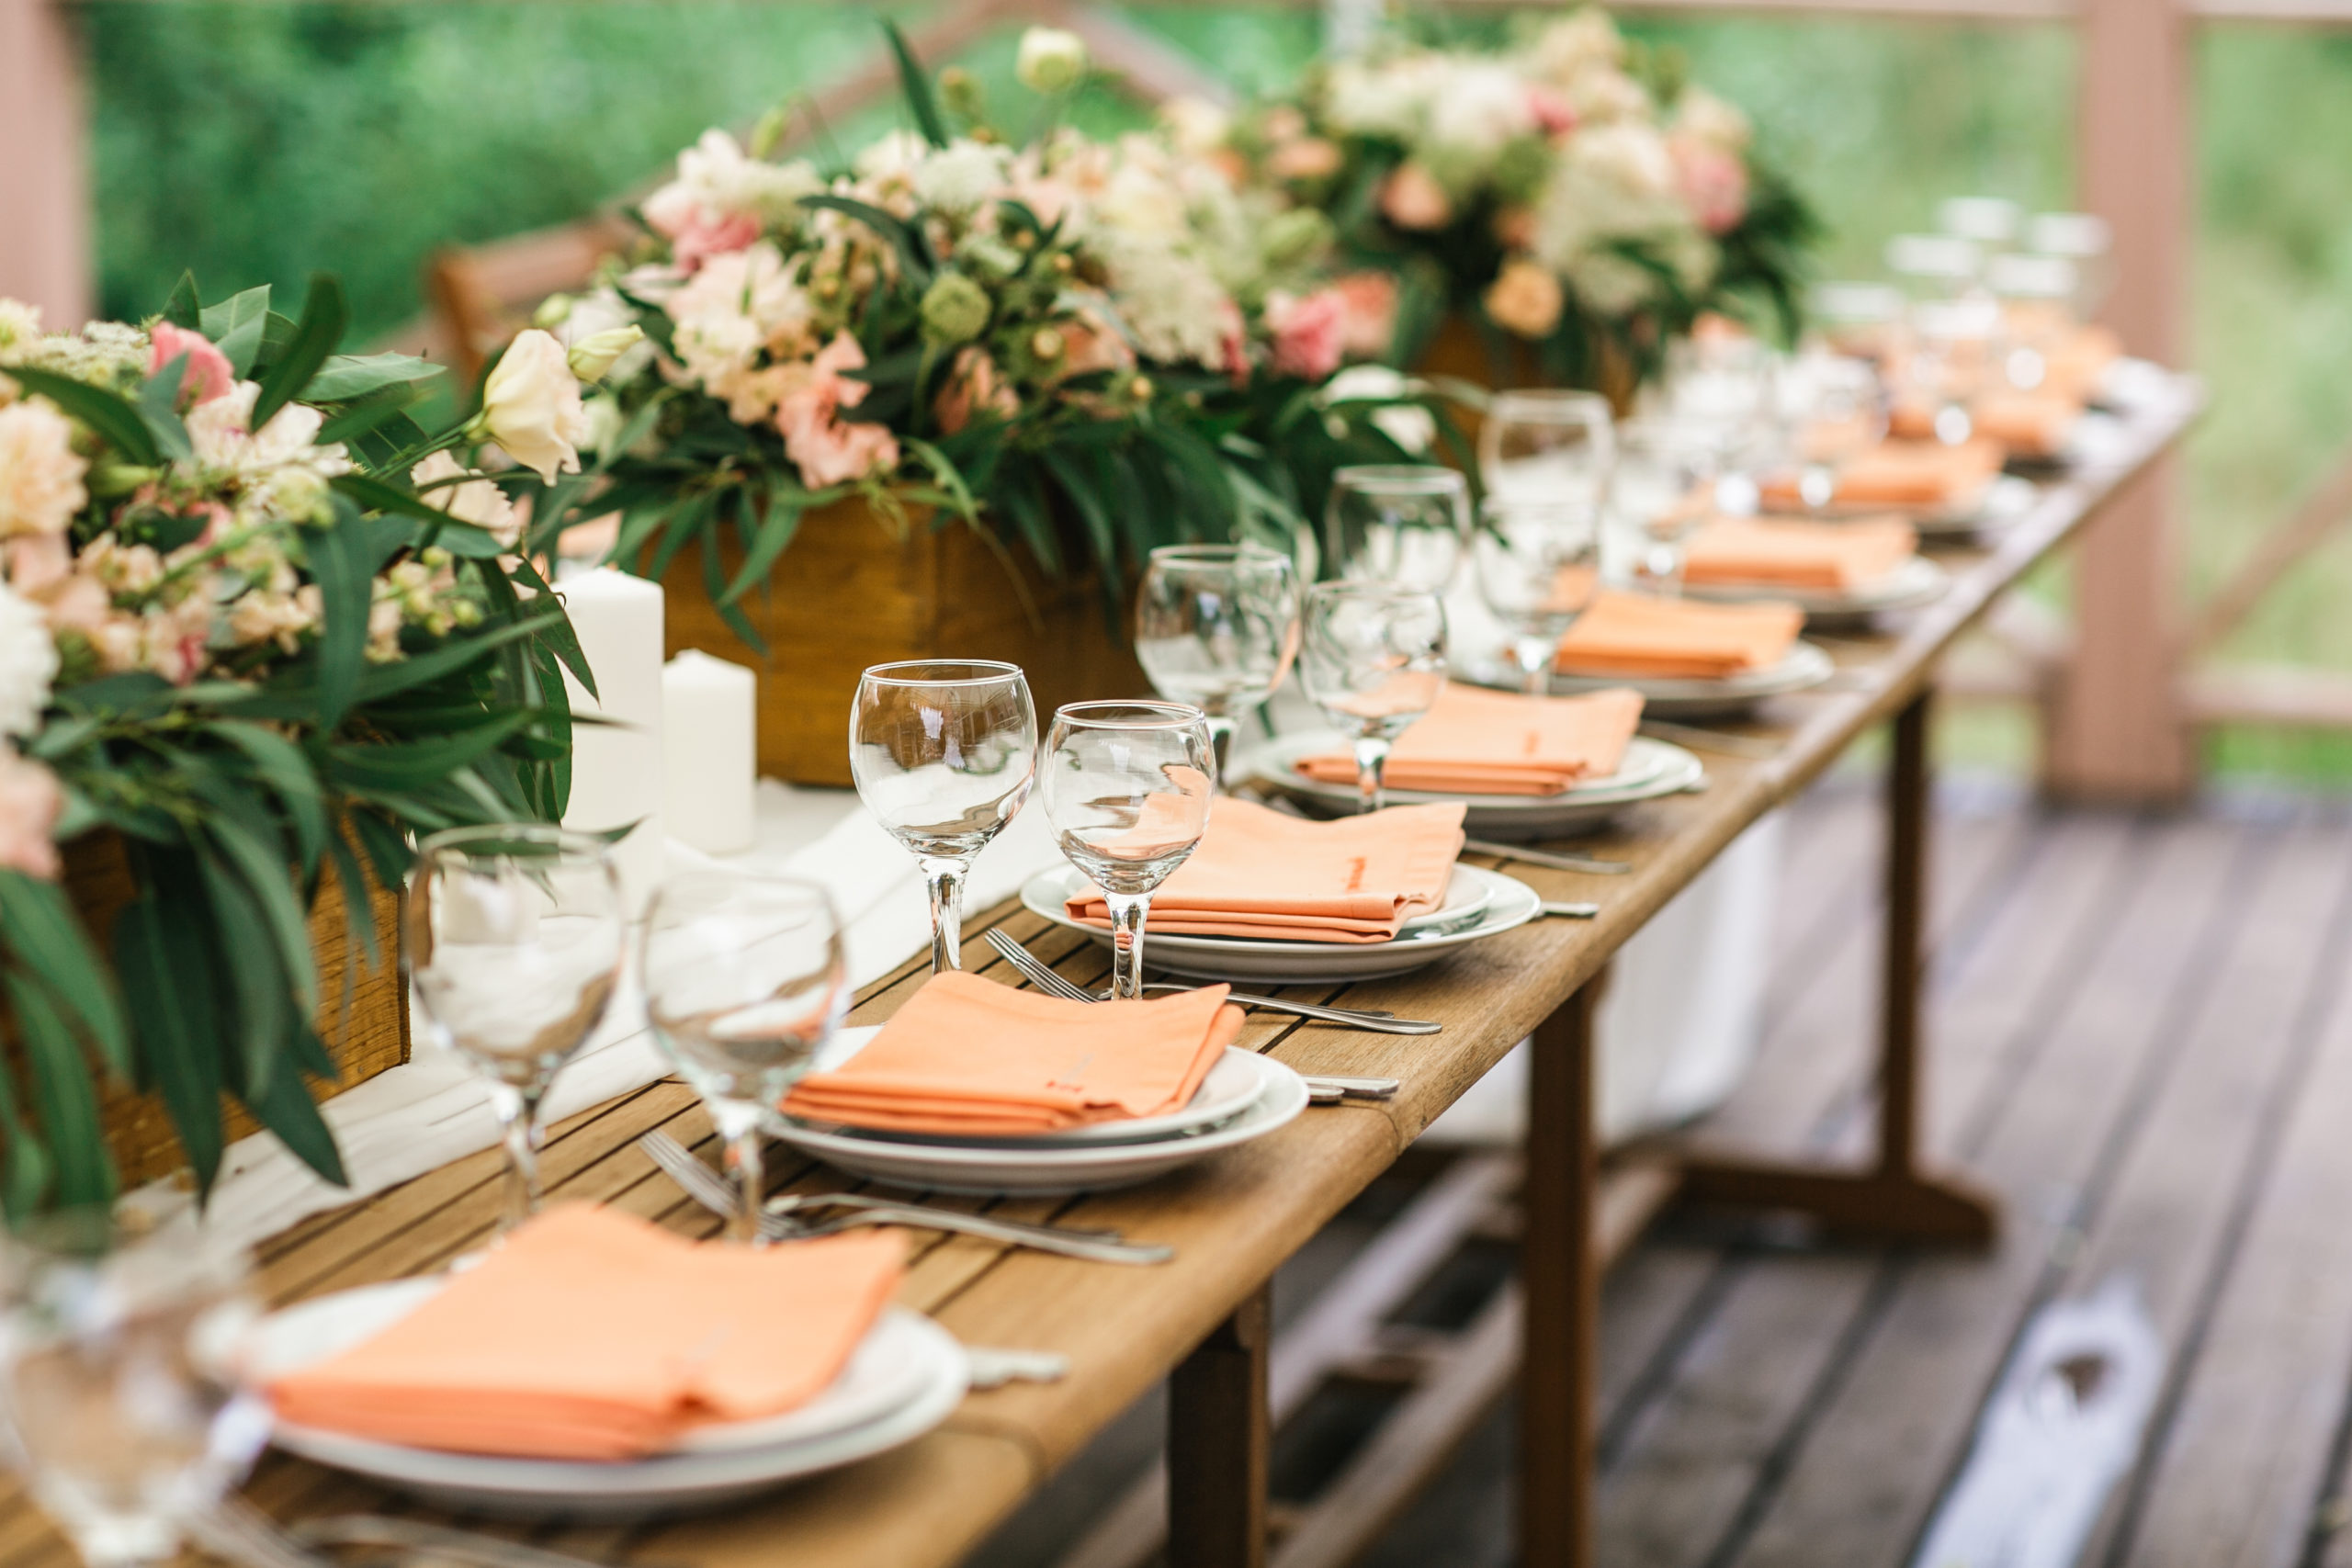 70+ Trending Wedding Color Schemes To Steal In 2023